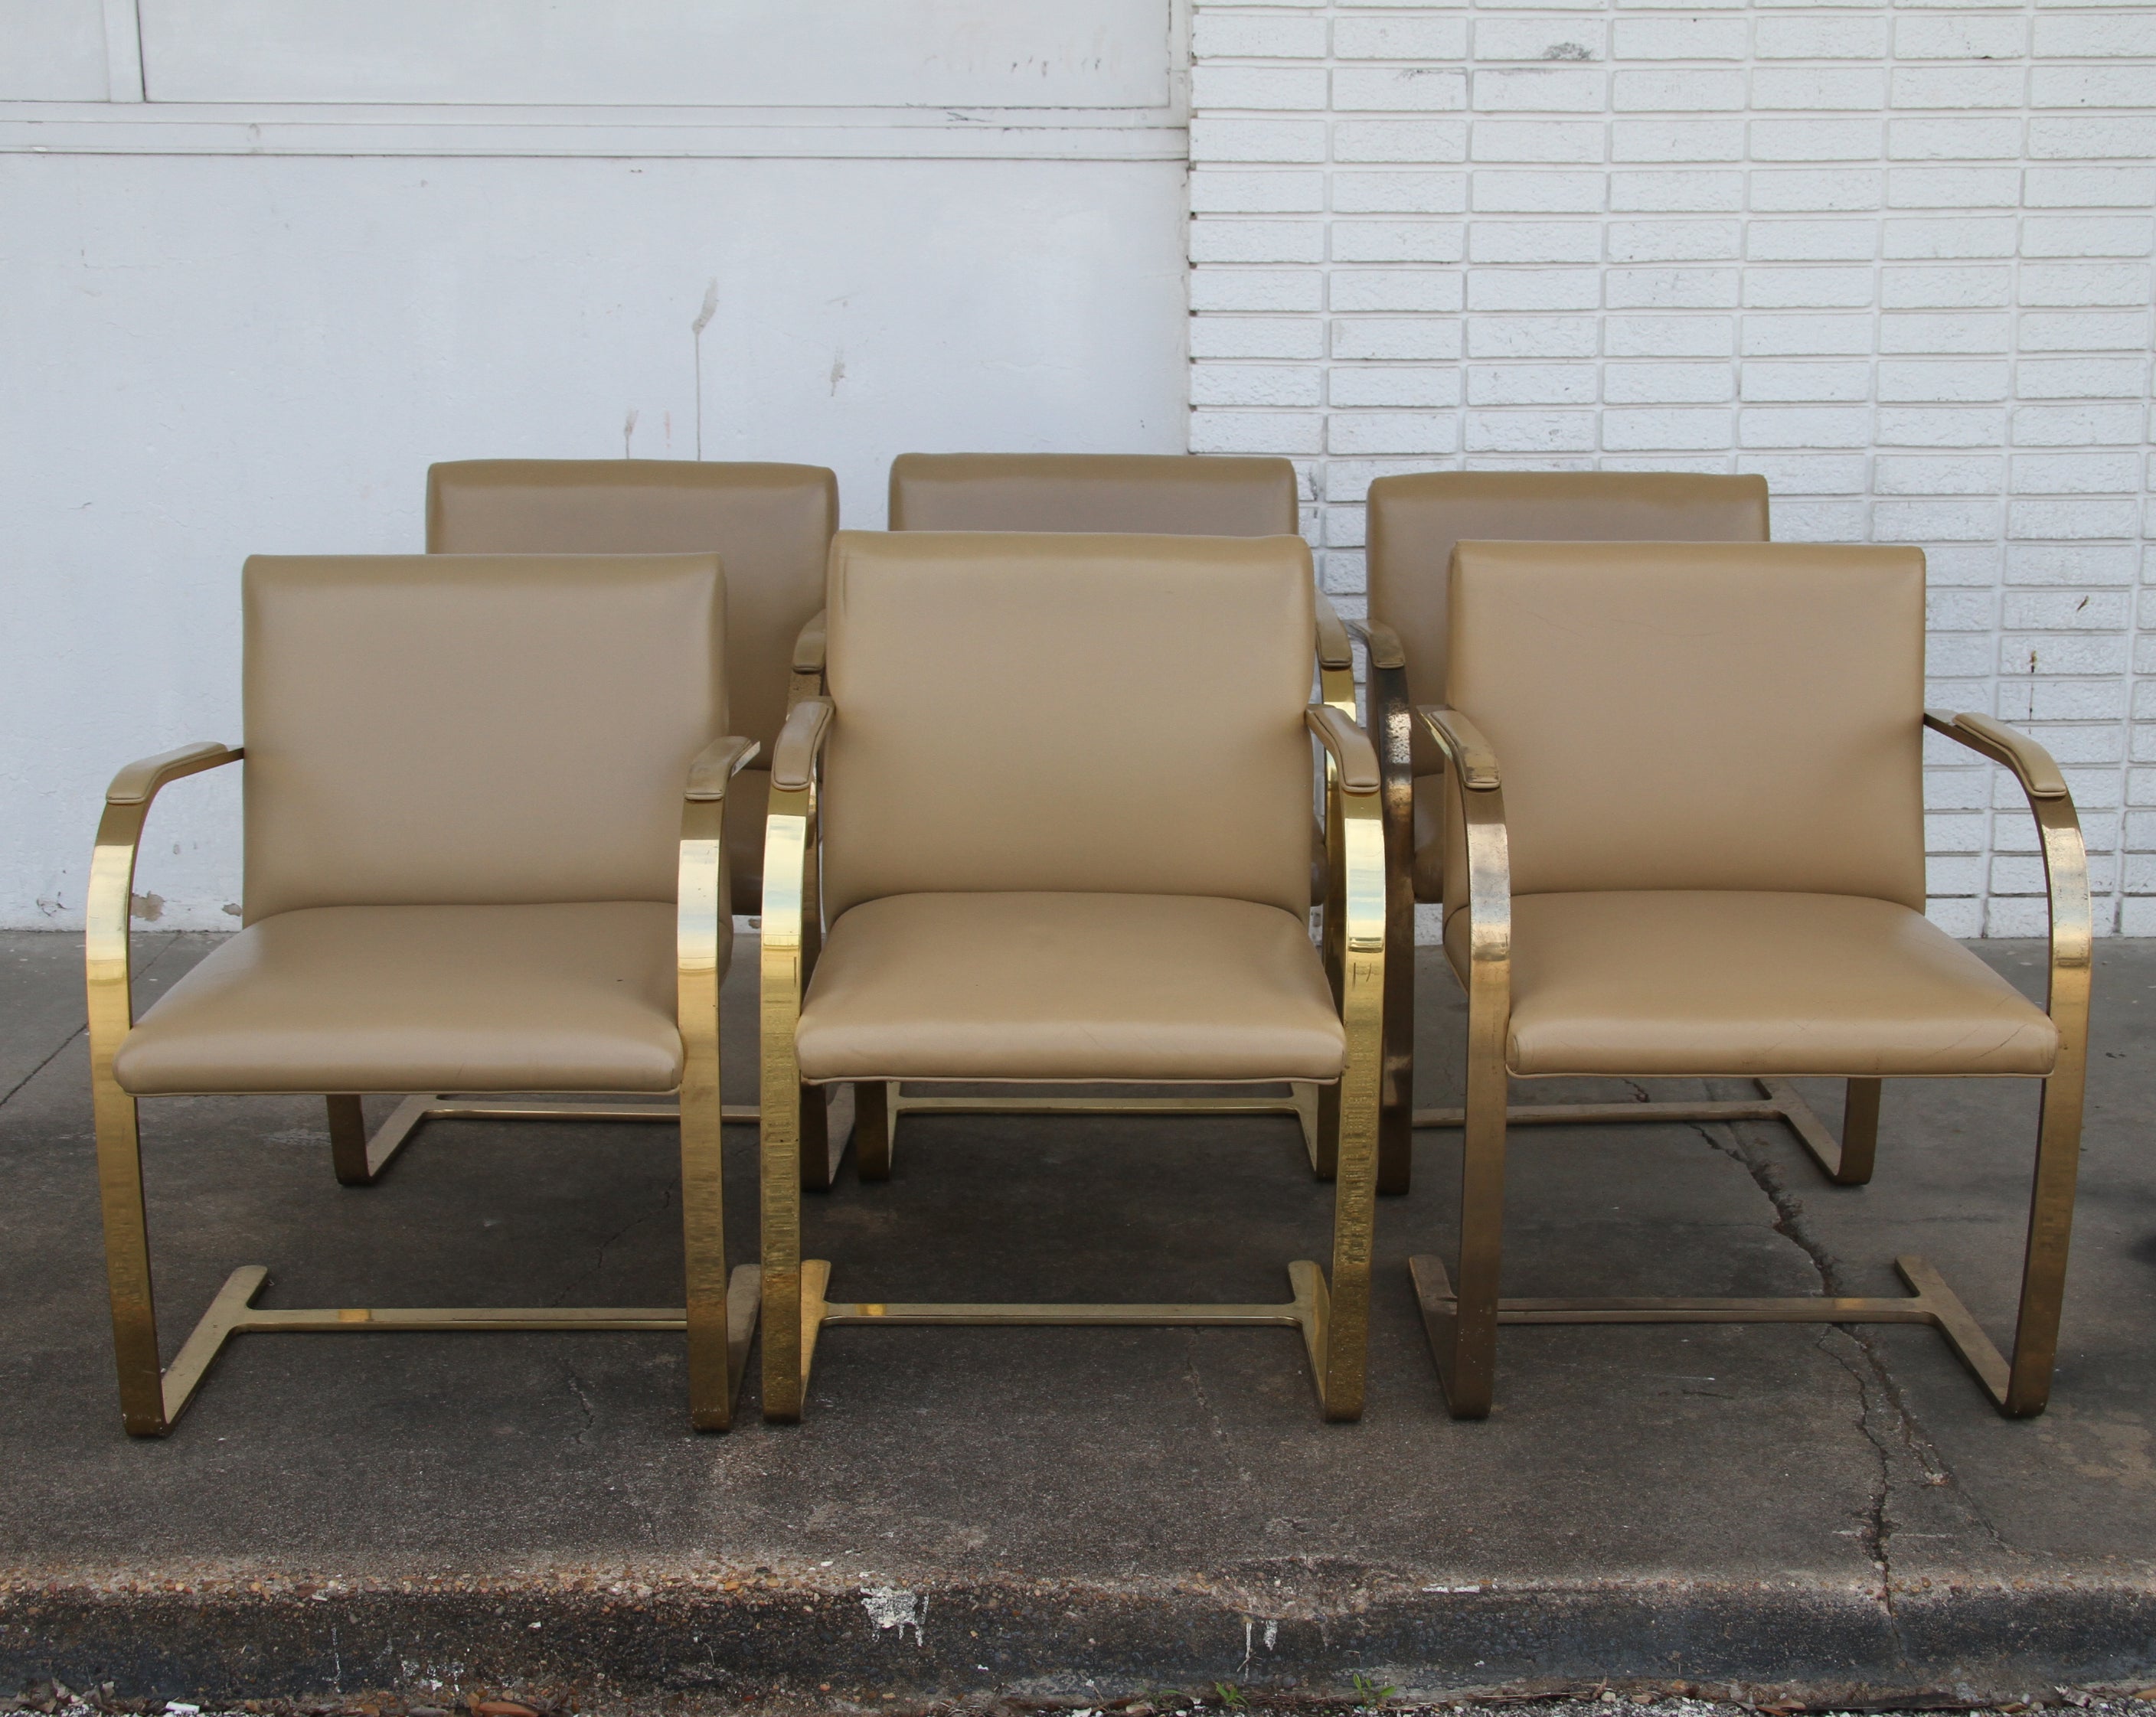 Rare vintage Brno chair designed by Mies van der Rohe. These chairs were a special order with bronze flat bar frames for a prominent law firm in Texas.

 Age appropriate wear, sold as is.
Large quantities available.

Dimensions: Height: 31.5 in